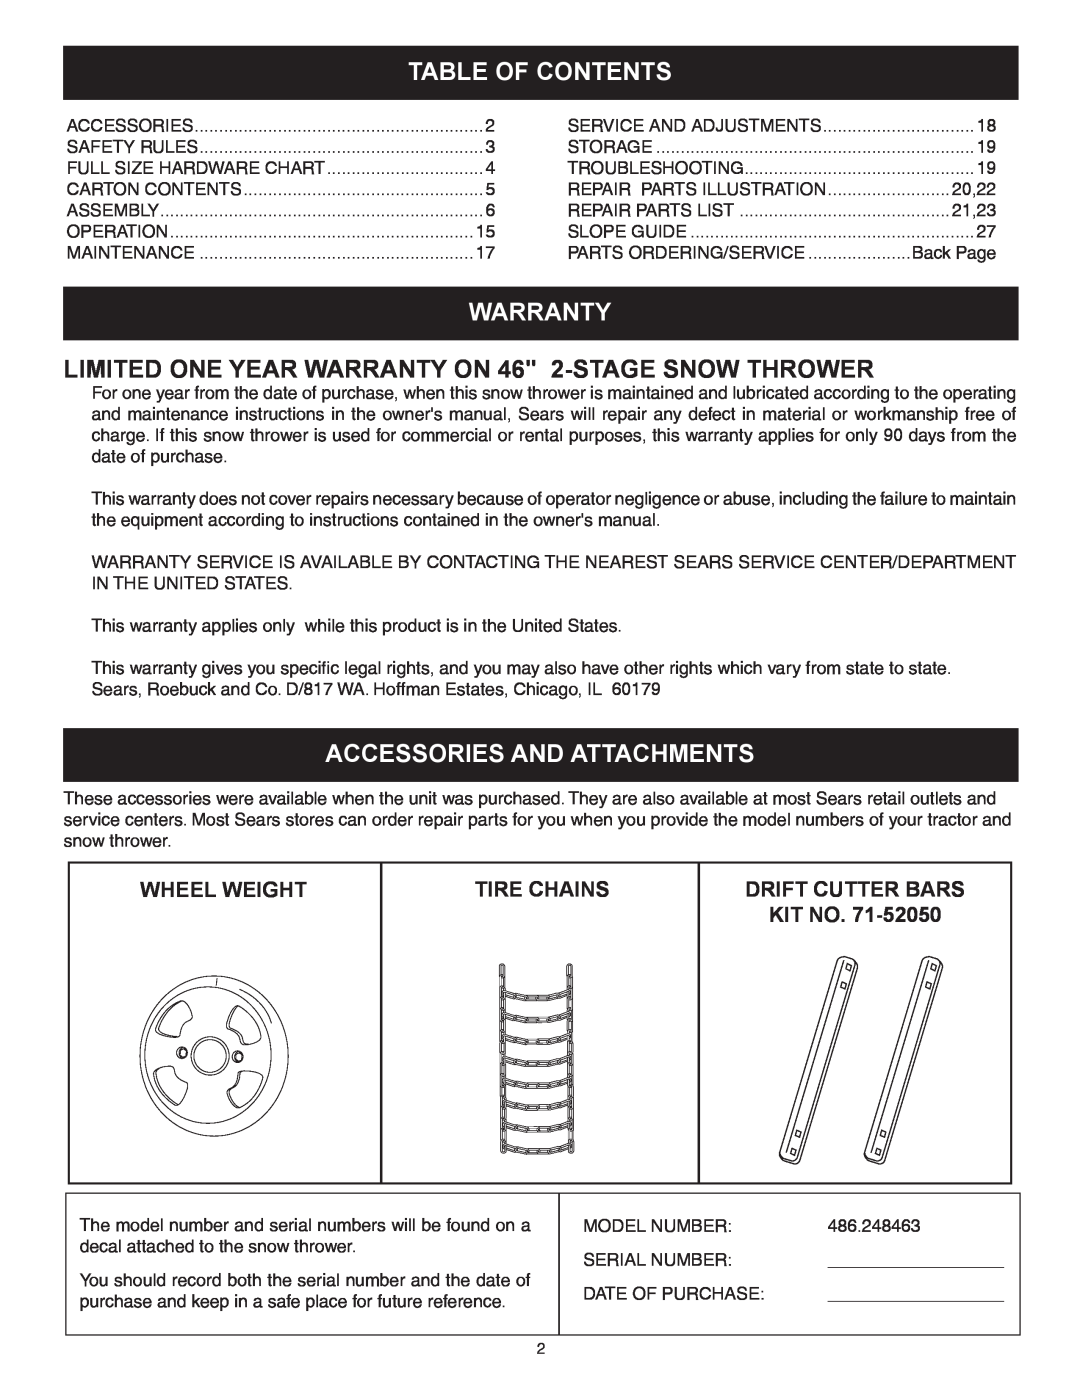 Sears 486.248463 Table Of Contents, Warranty, LIMITED ONE YEAR WARRANTY ON 46 2-STAGE SNOW THROWER, Wheel Weight, Kit No 